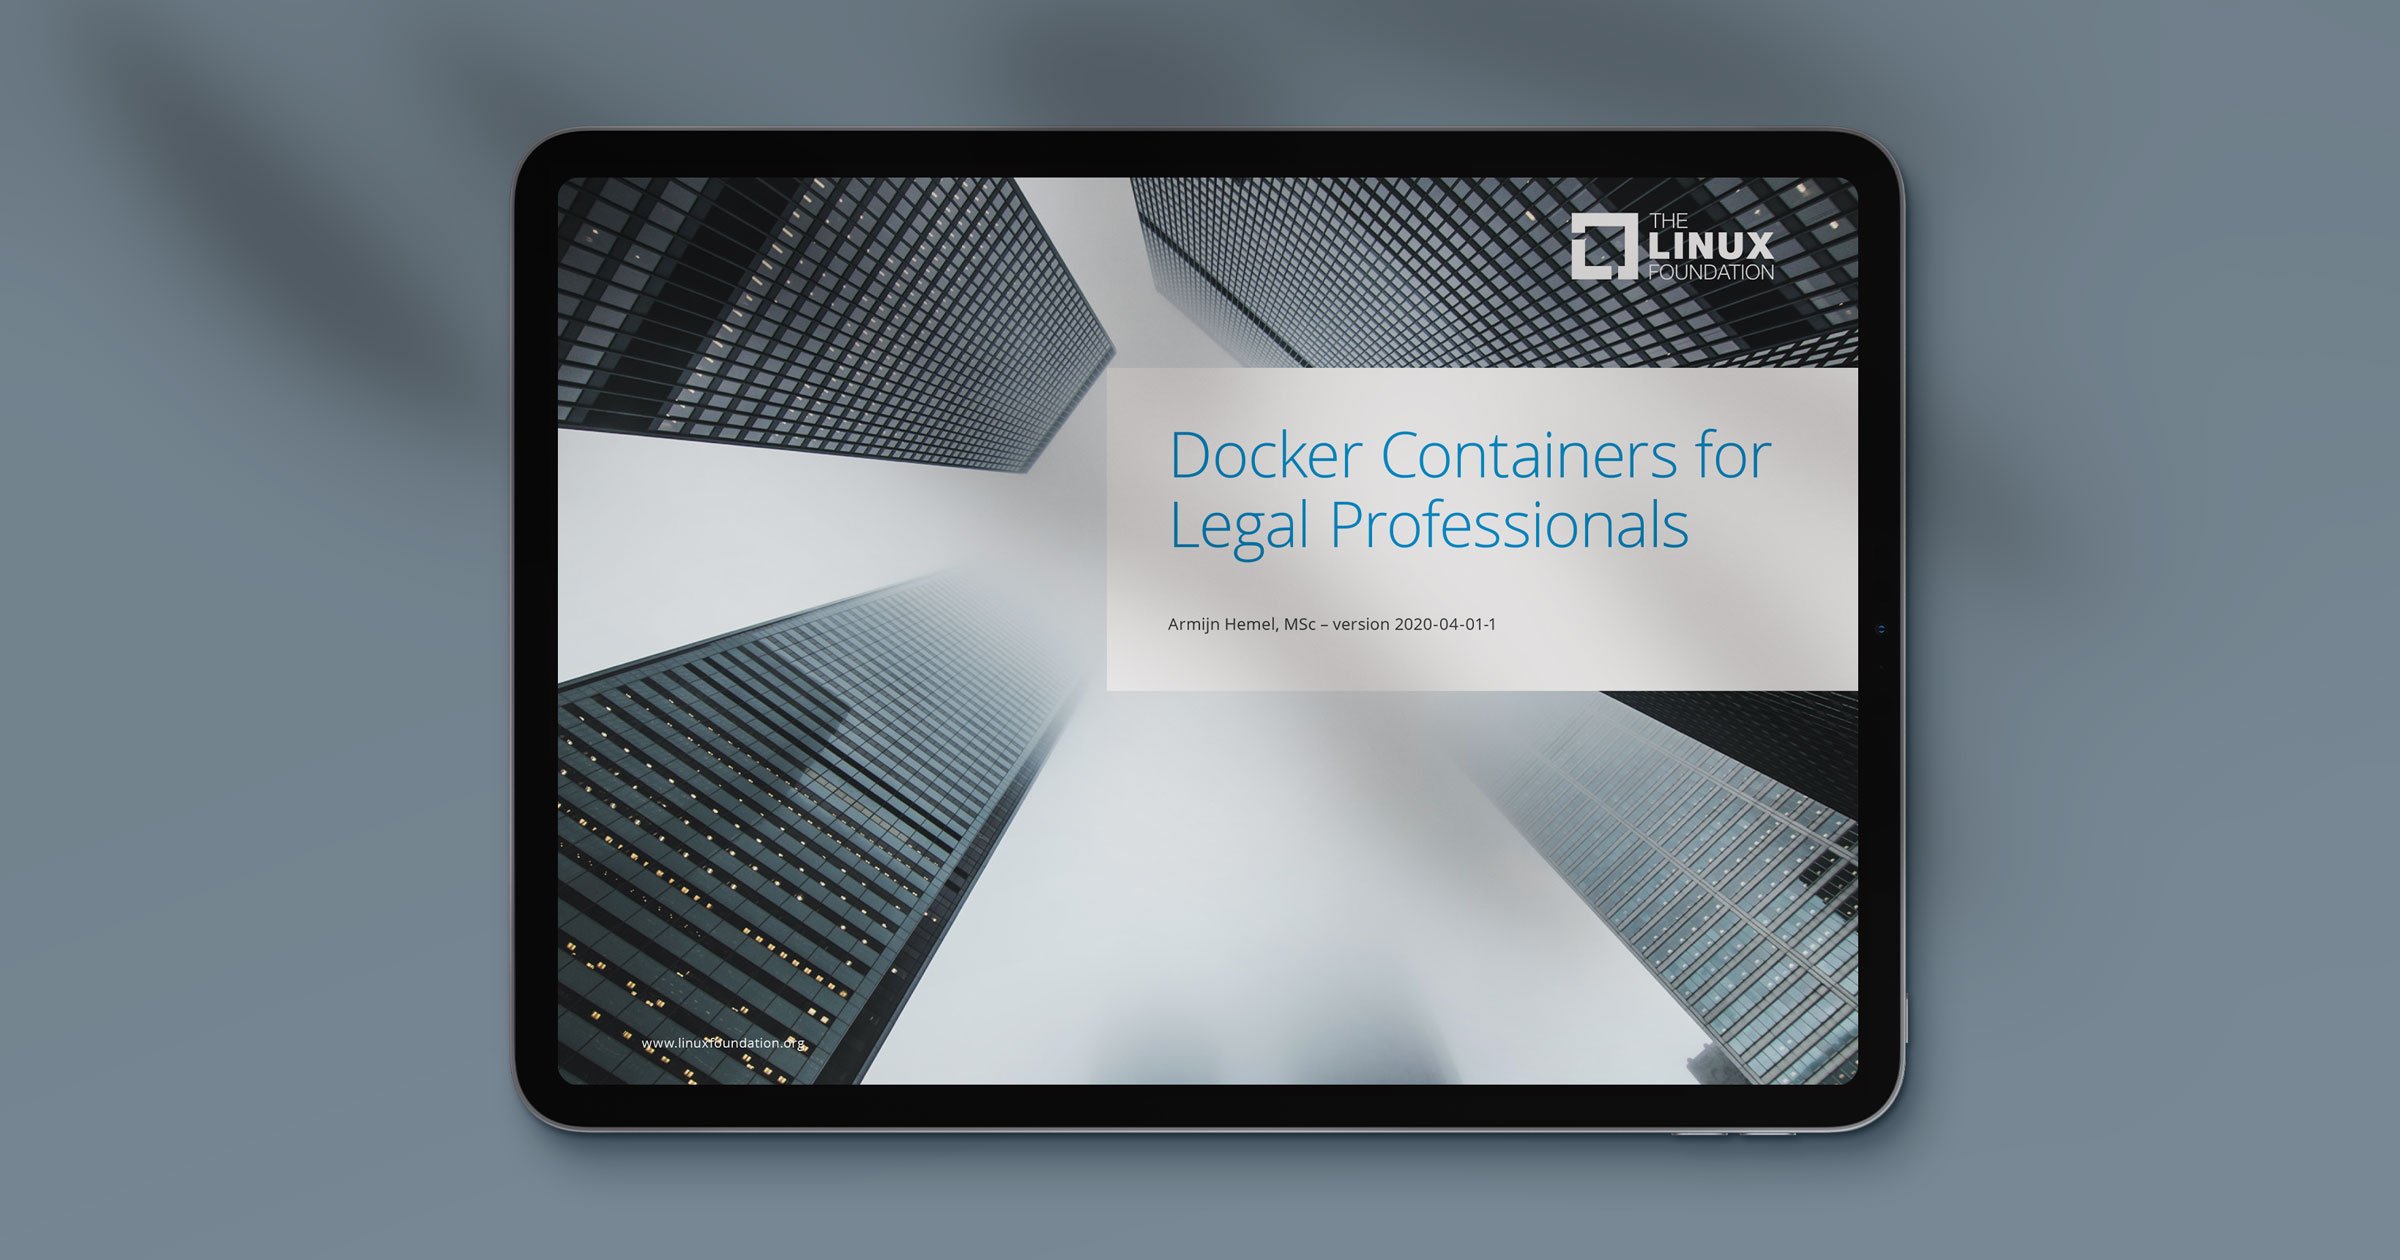 Docker containers: What are the open source licensing considerations? Featured Image 2